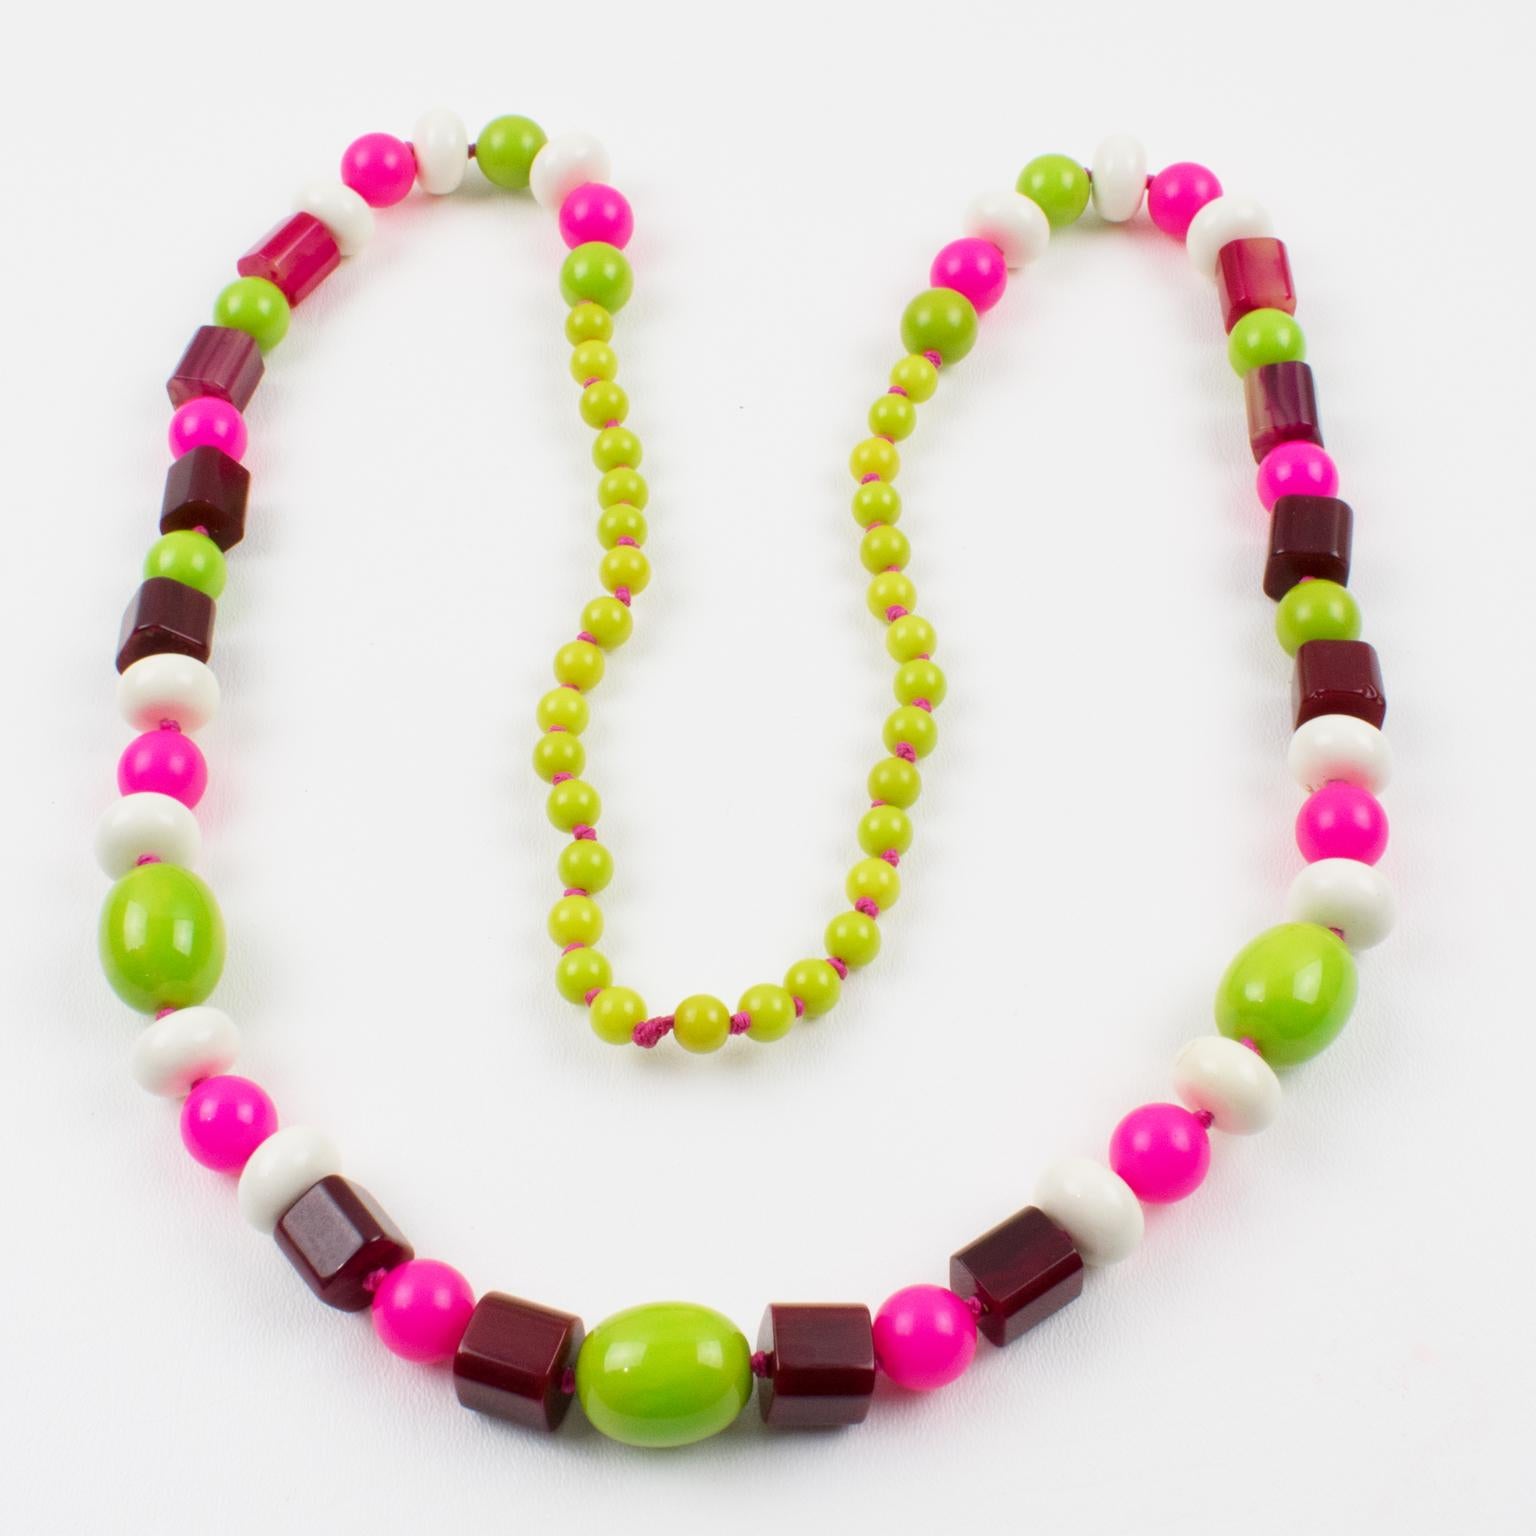 Women's or Men's Bakelite and Lucite Long Necklace White, Hot Pink, Apple Green Beads For Sale